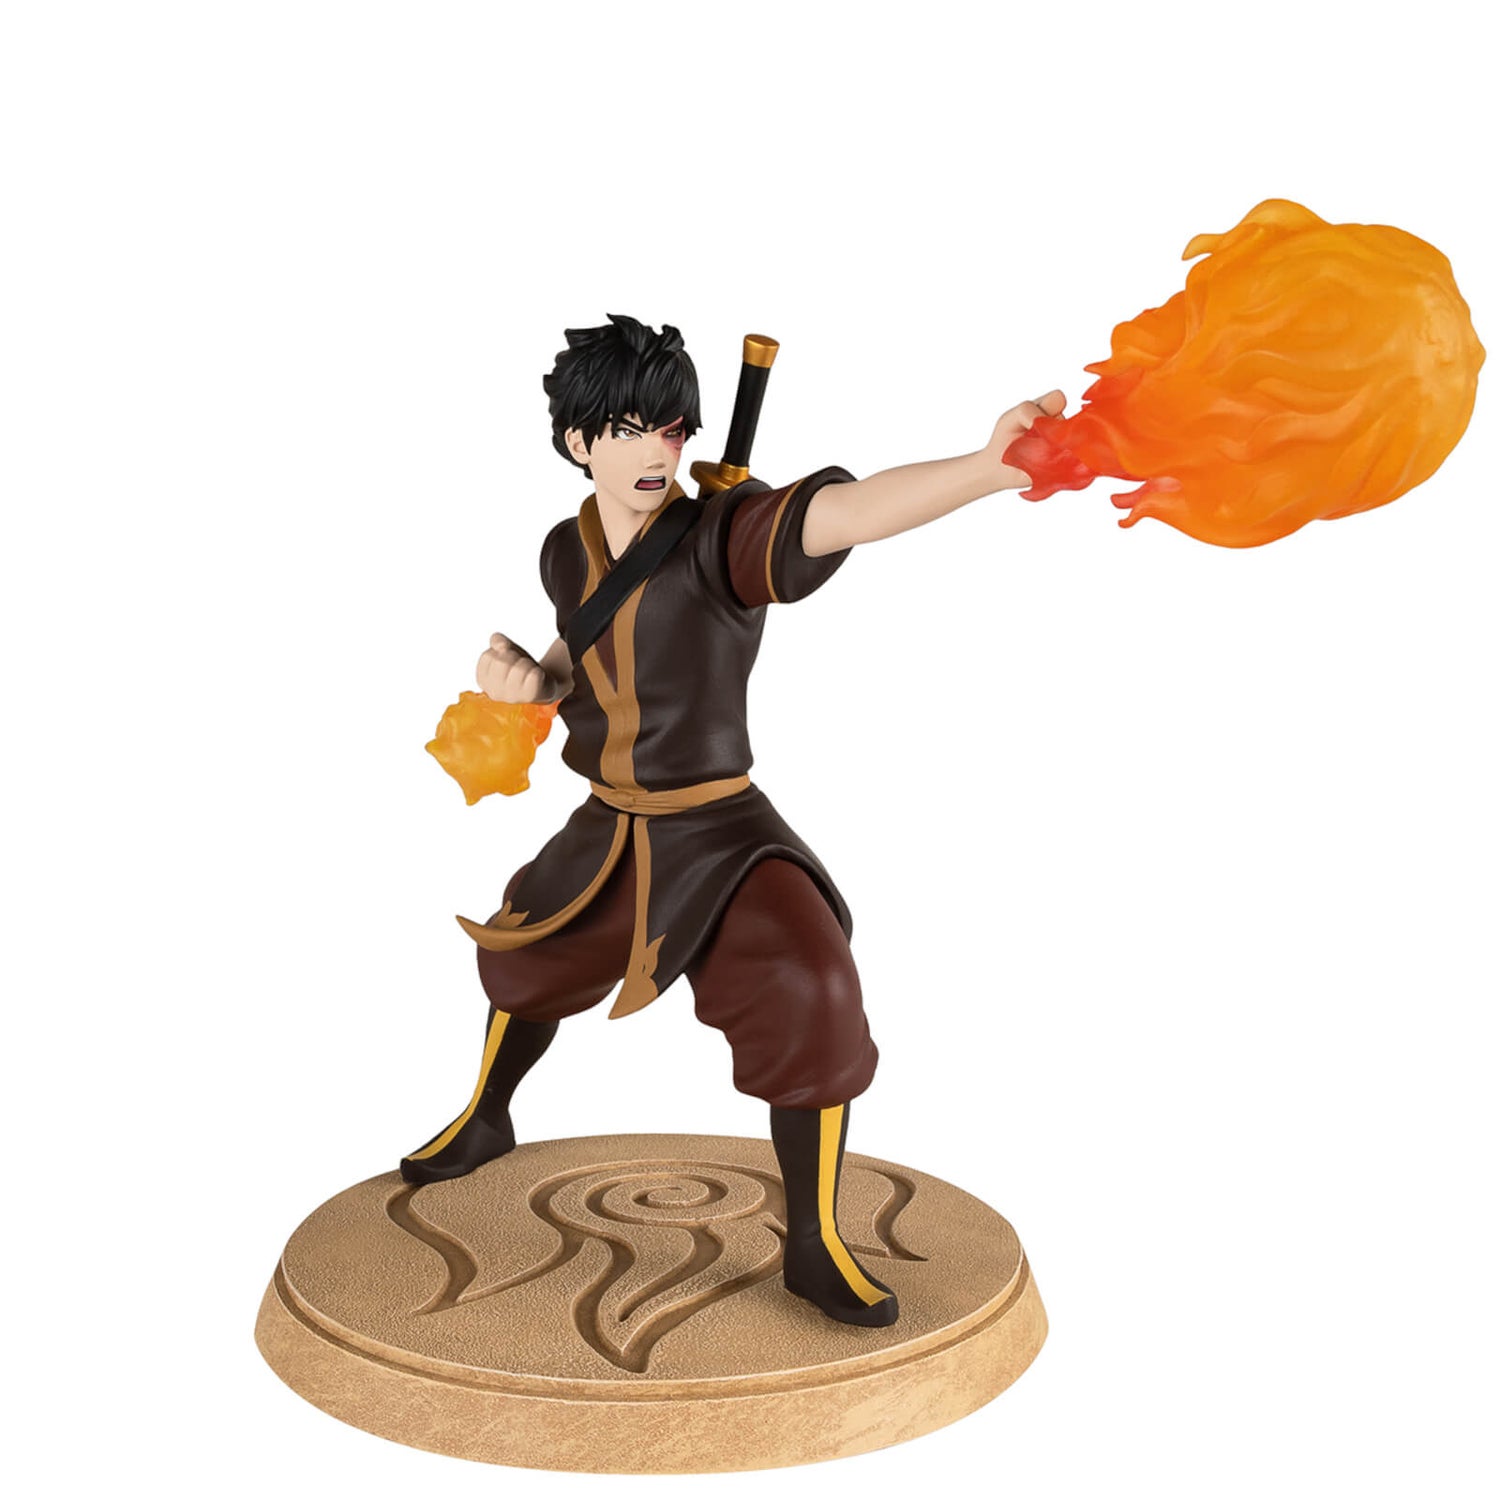 Avatar The Last Airbender Merch  OFFICIAL Avatar Store